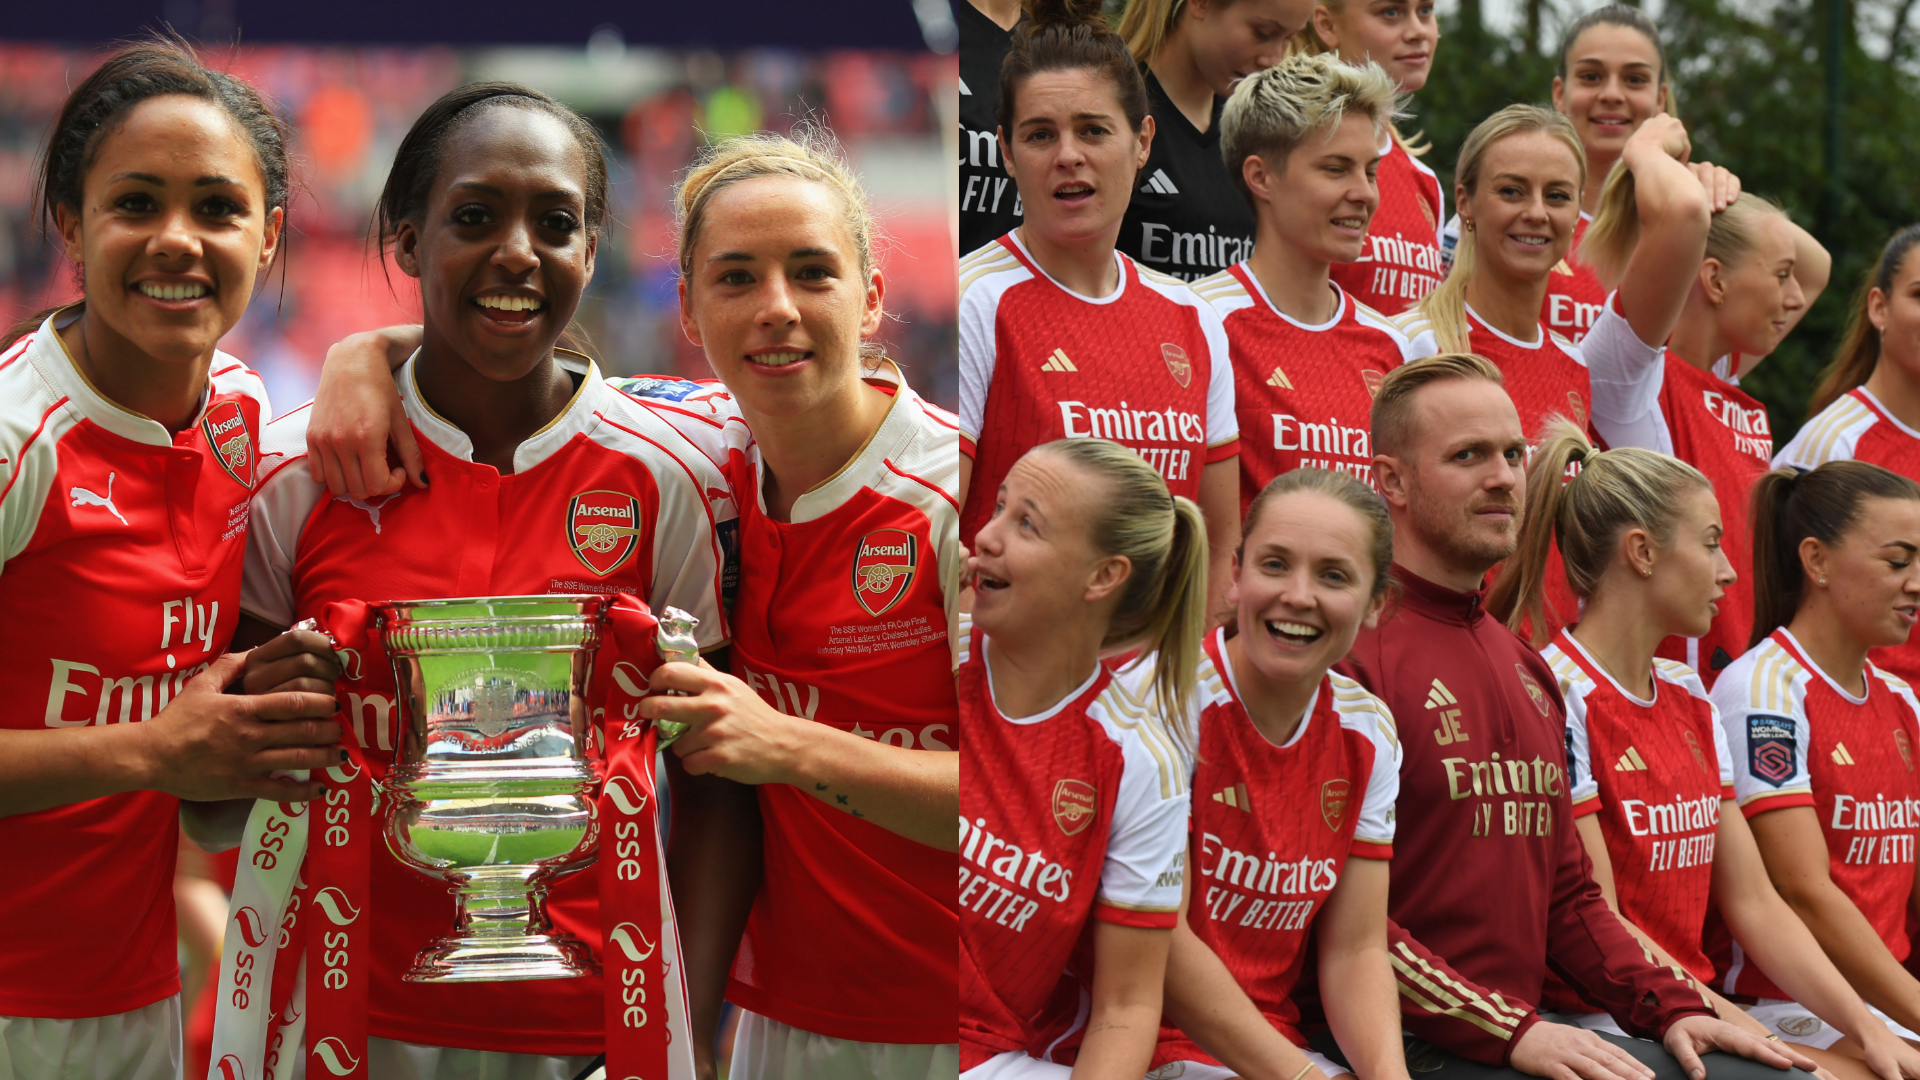 Arsenal Women acknowledge lack of diversity in team photo